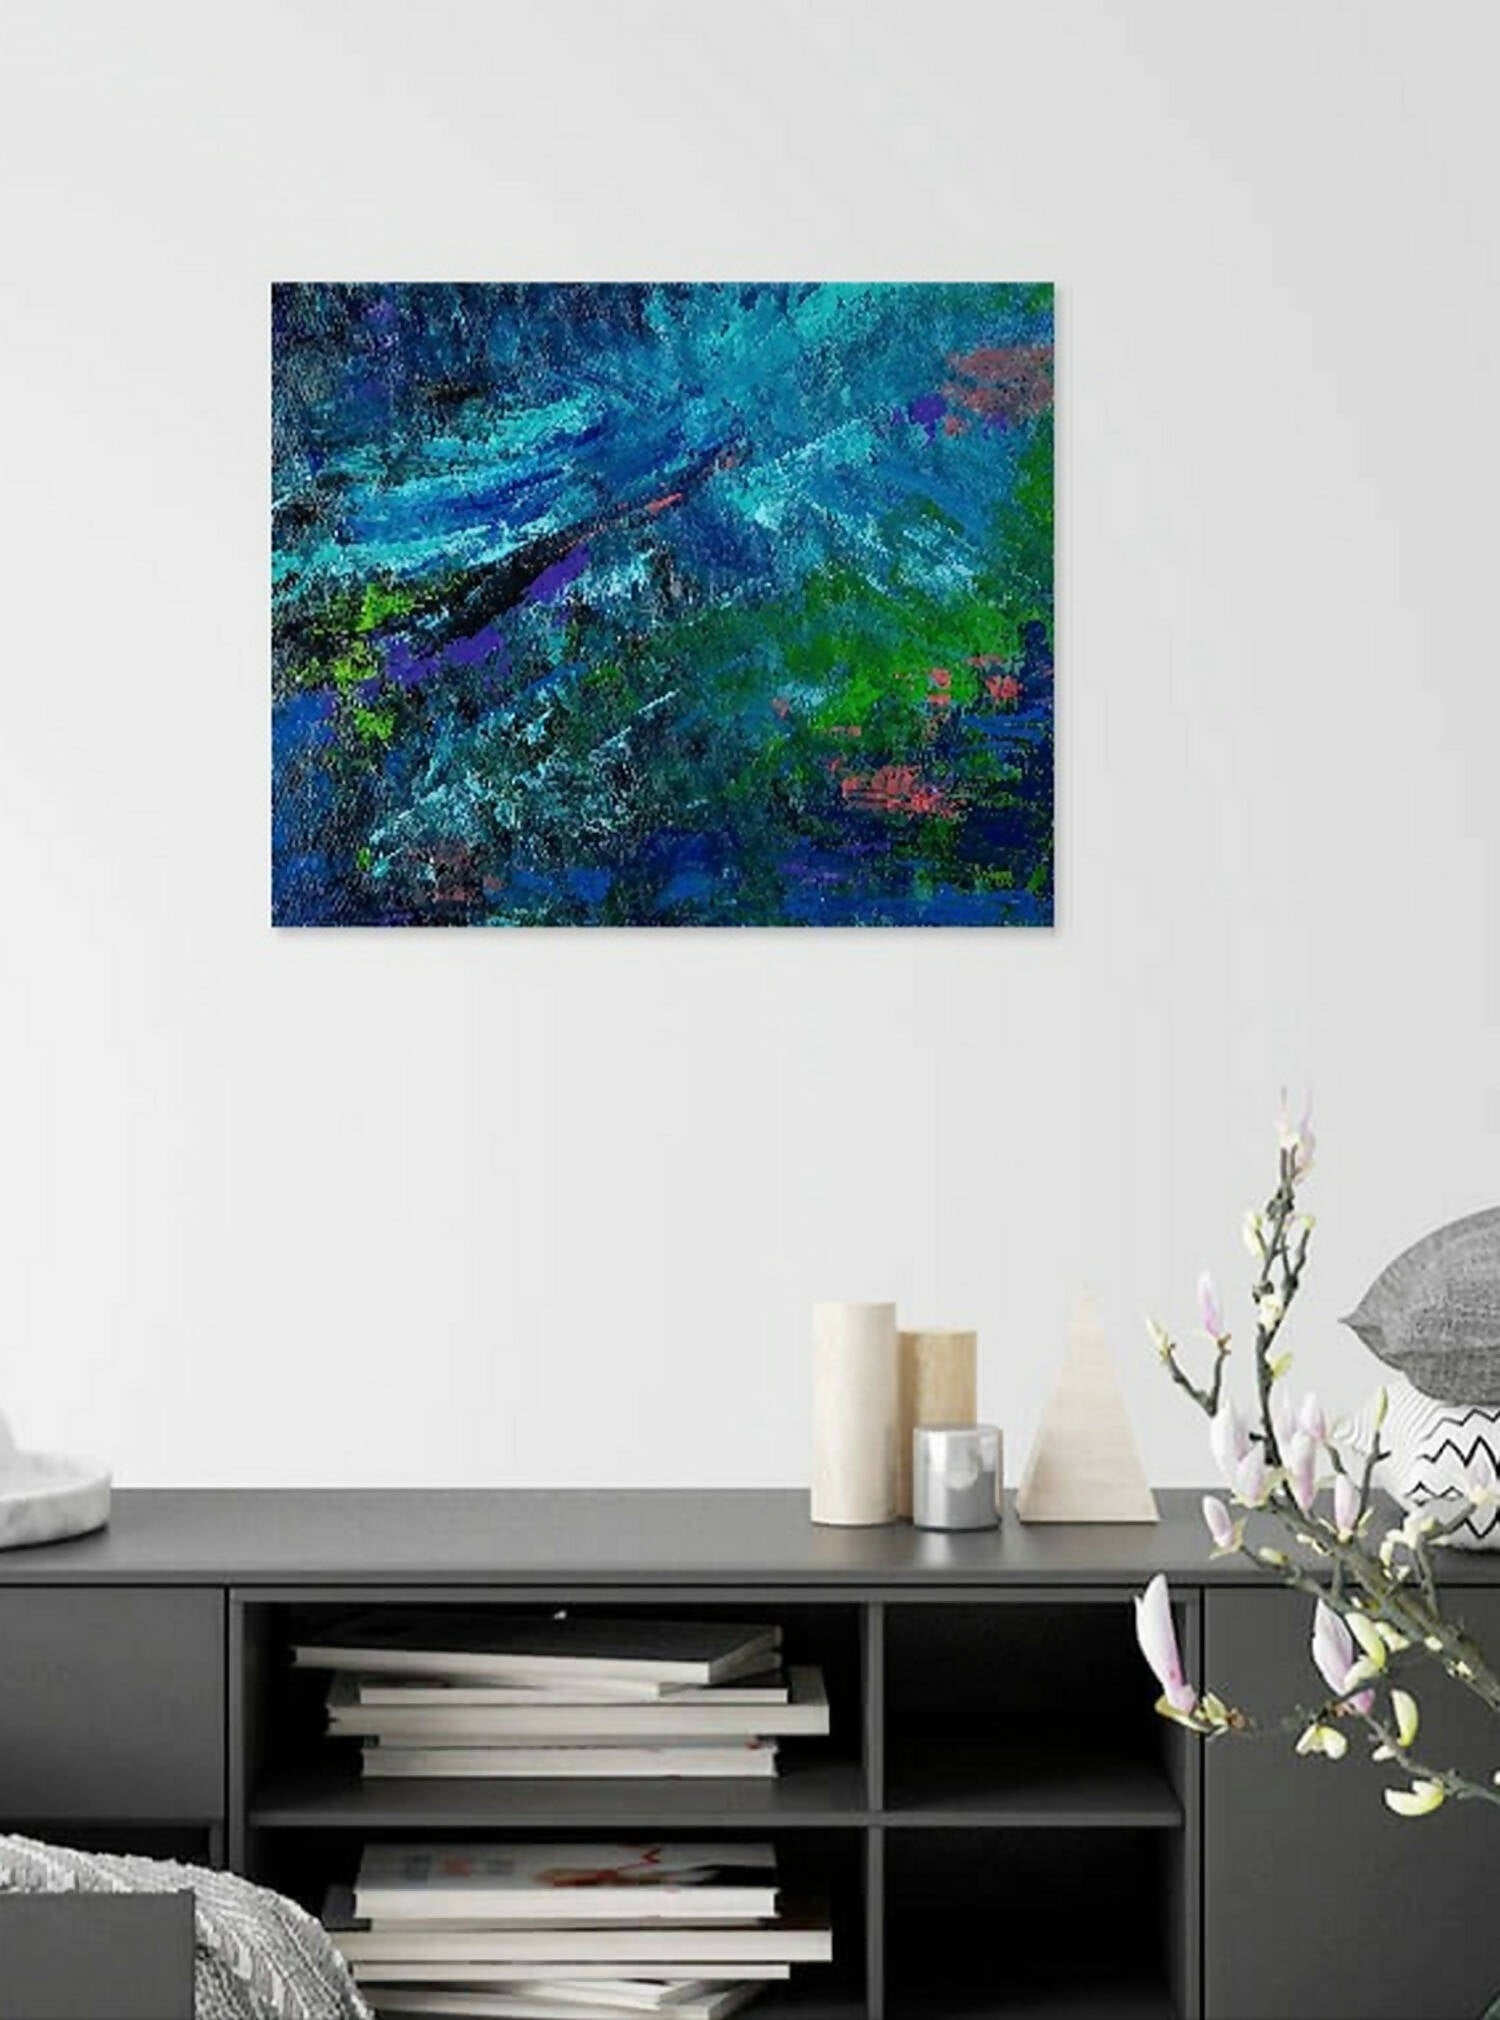 Blue pond with pink water lilies, abstract painting on canvas